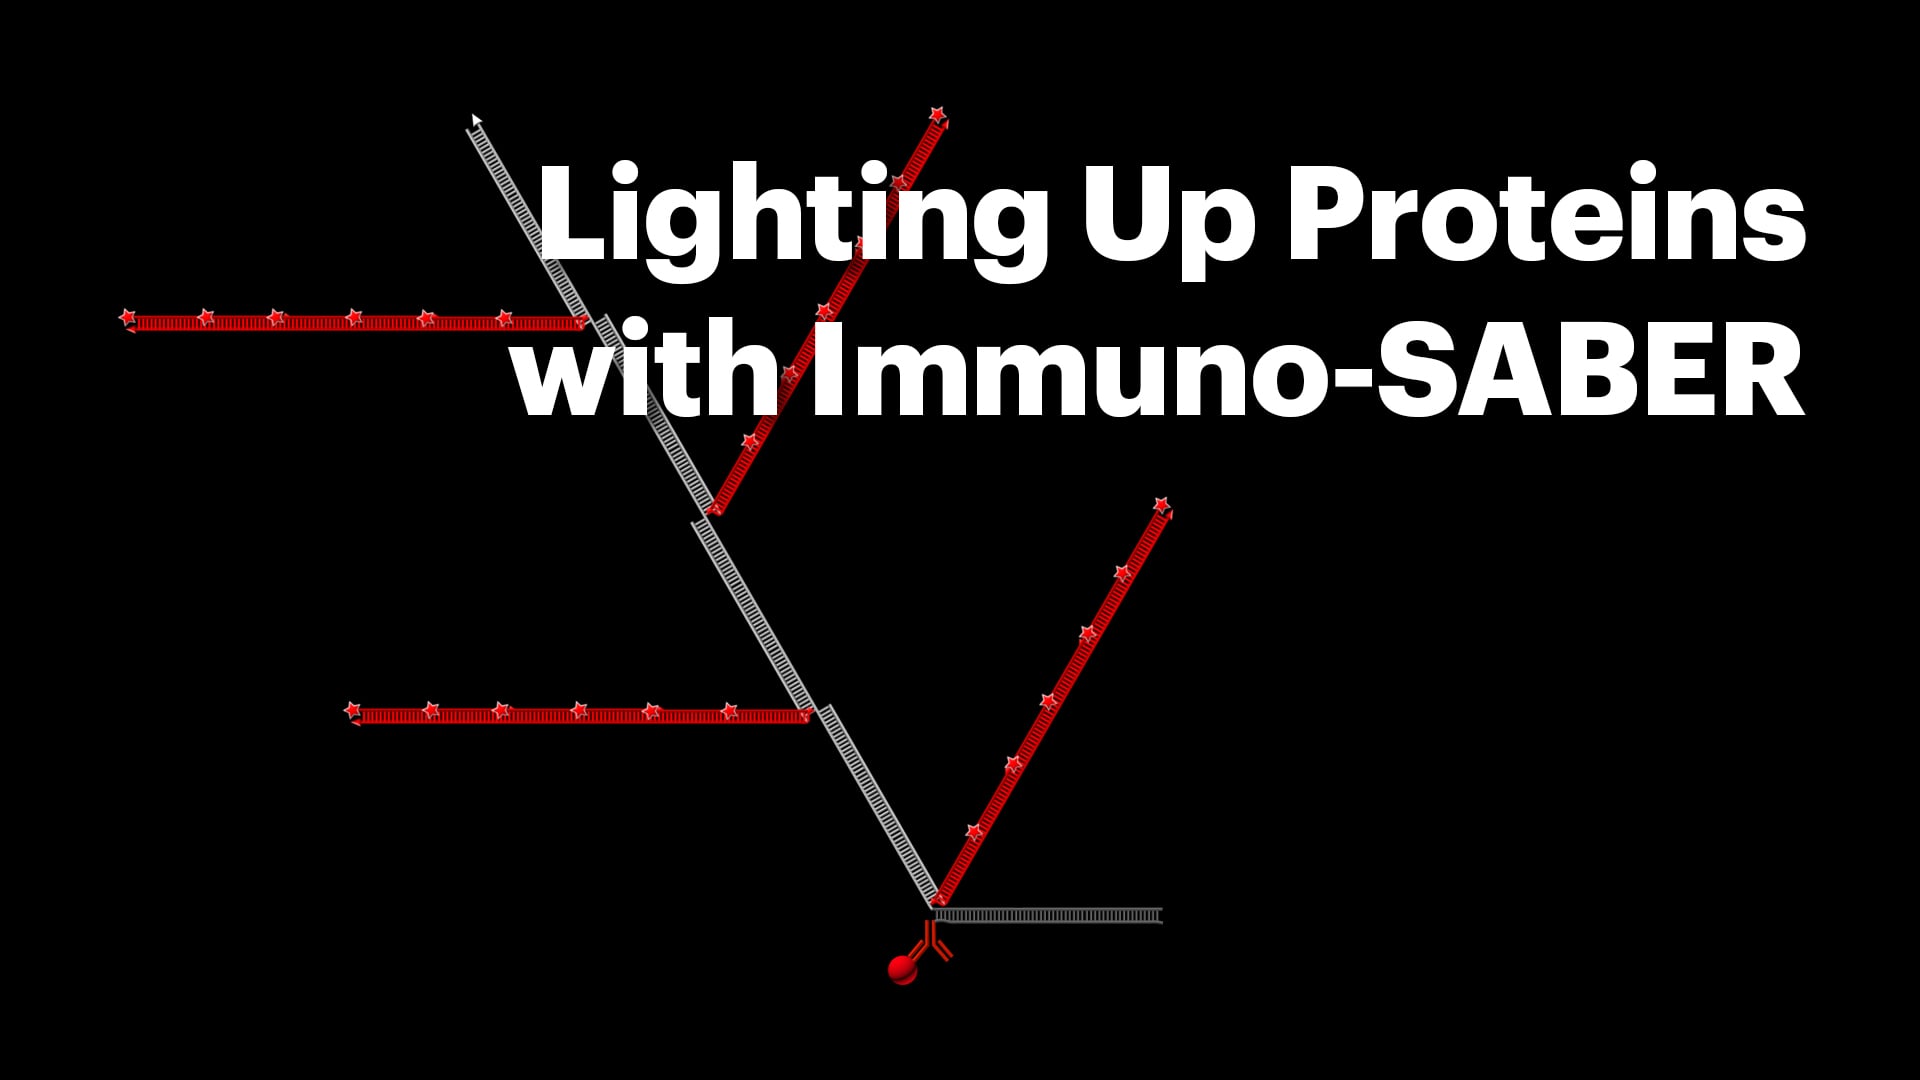 Lighting up proteins with Immuno-SABER